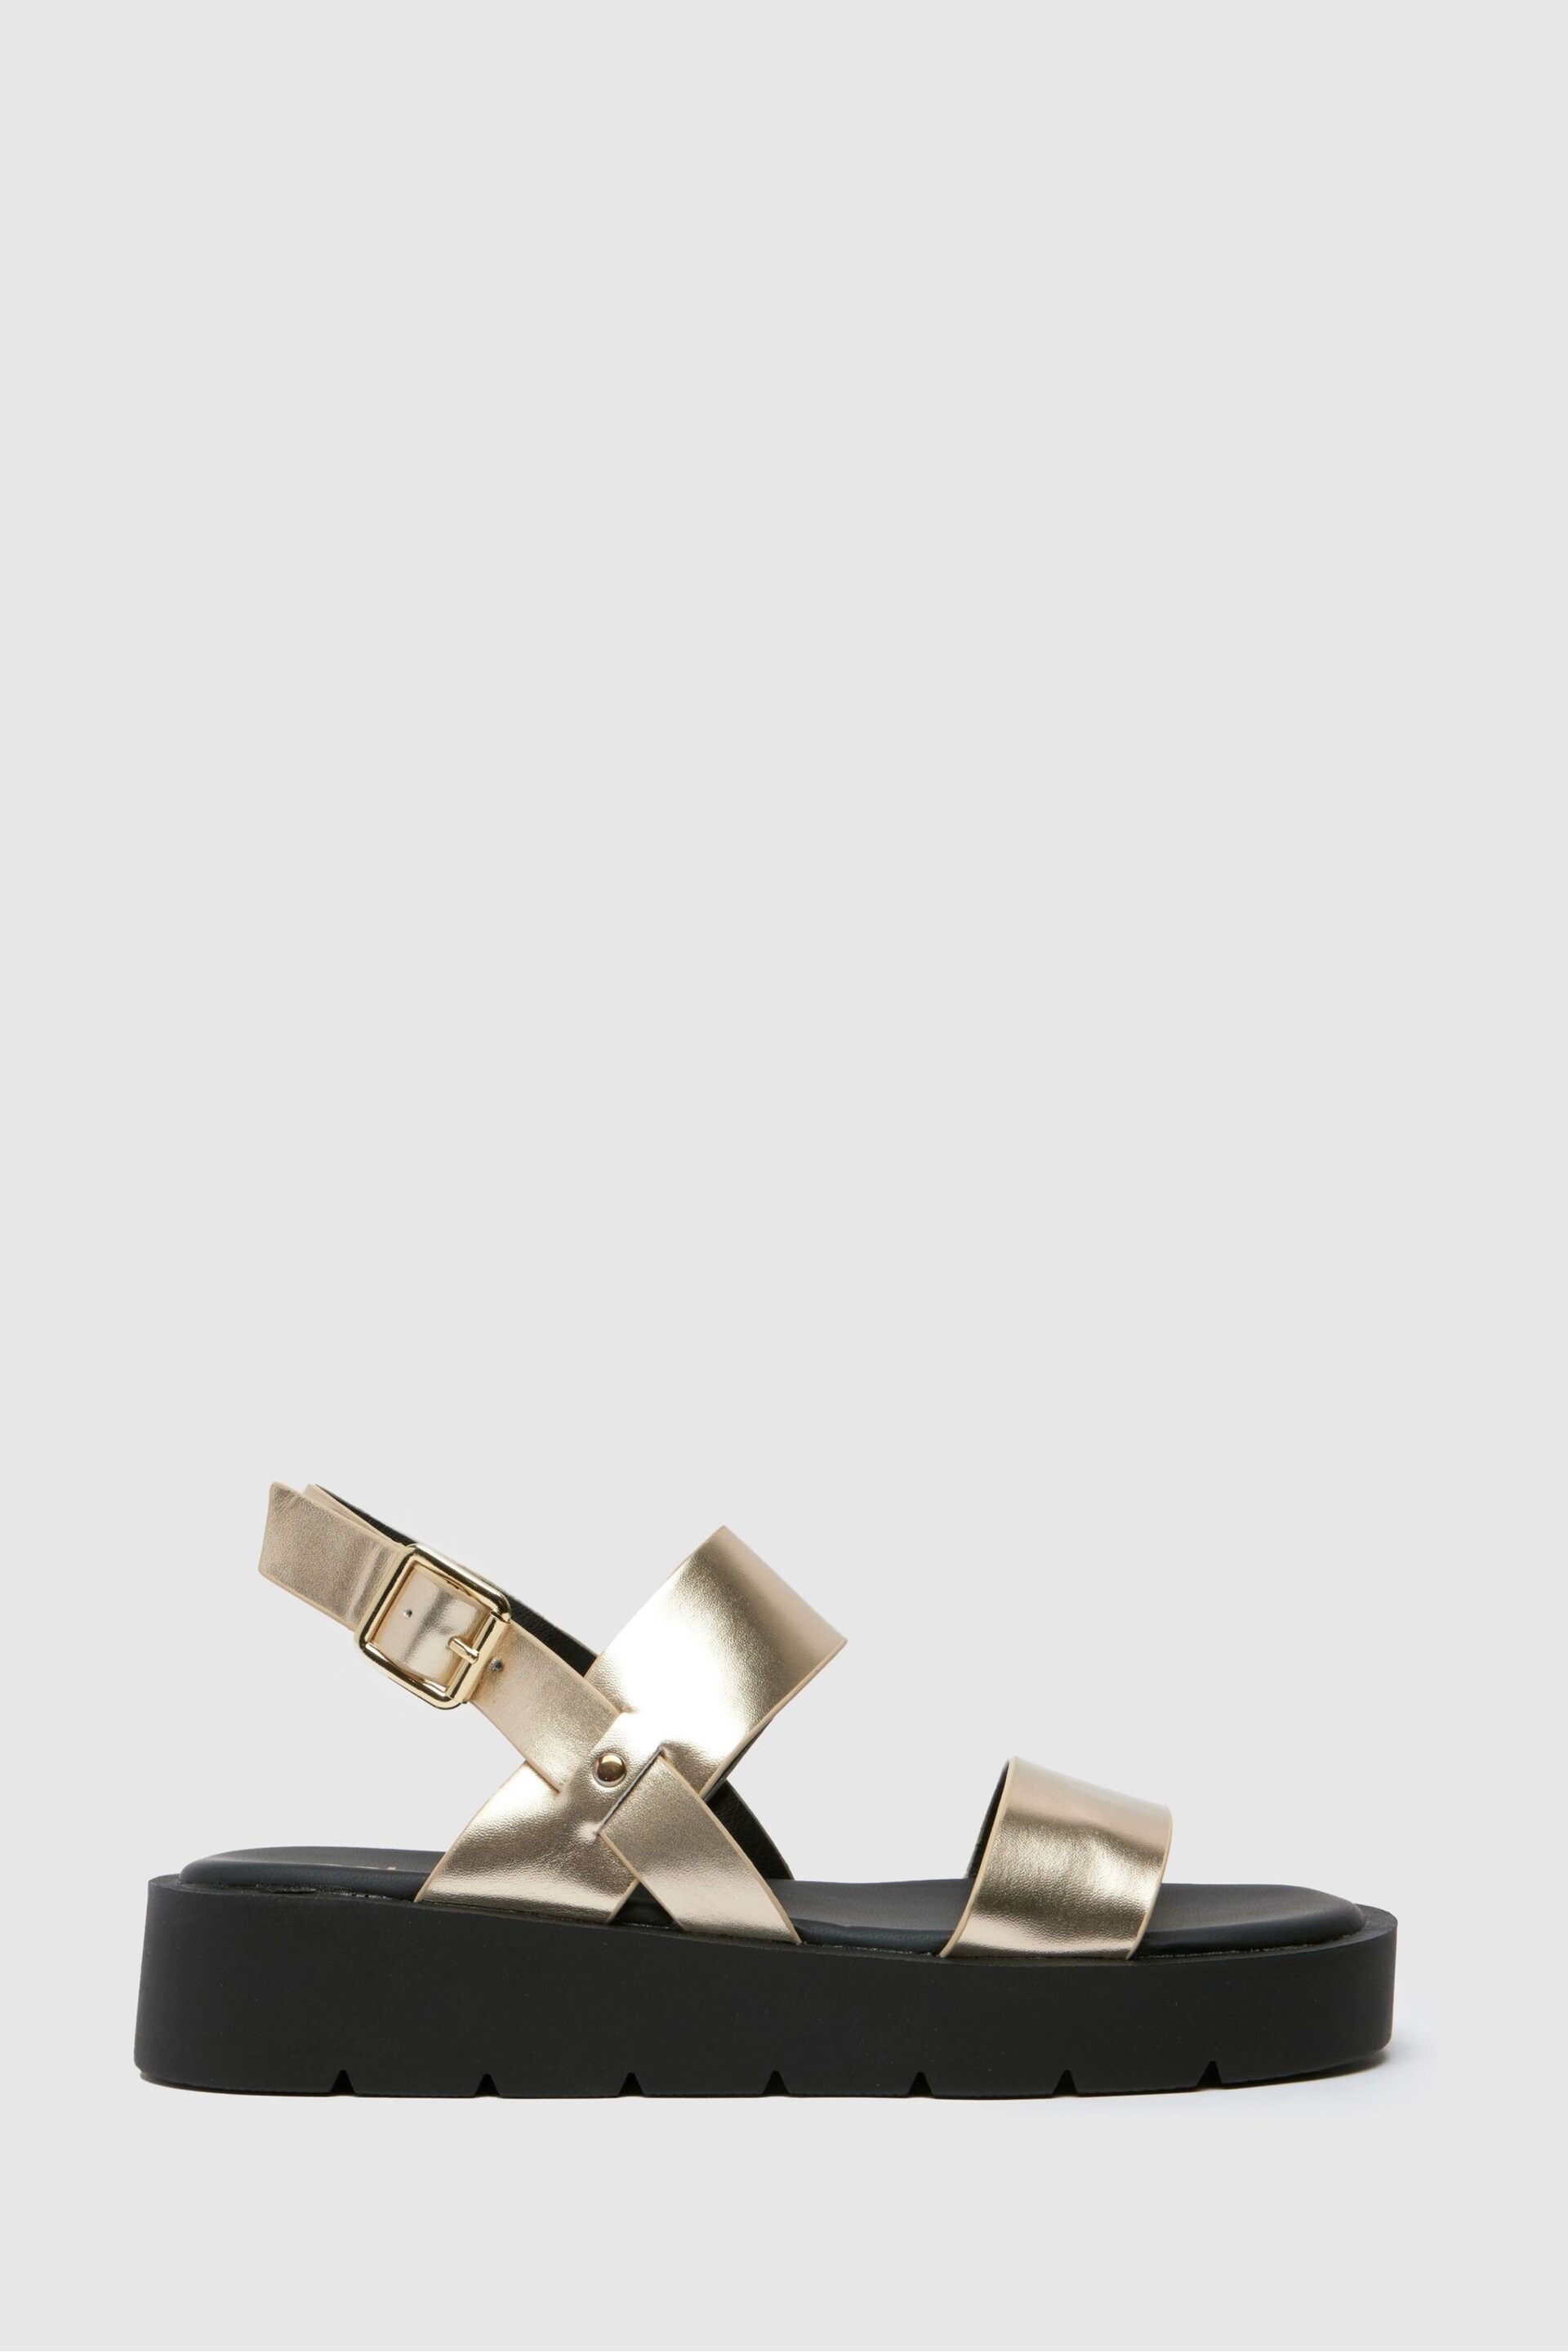 Schuh Tayla Chunky Sandals - Image 1 of 4